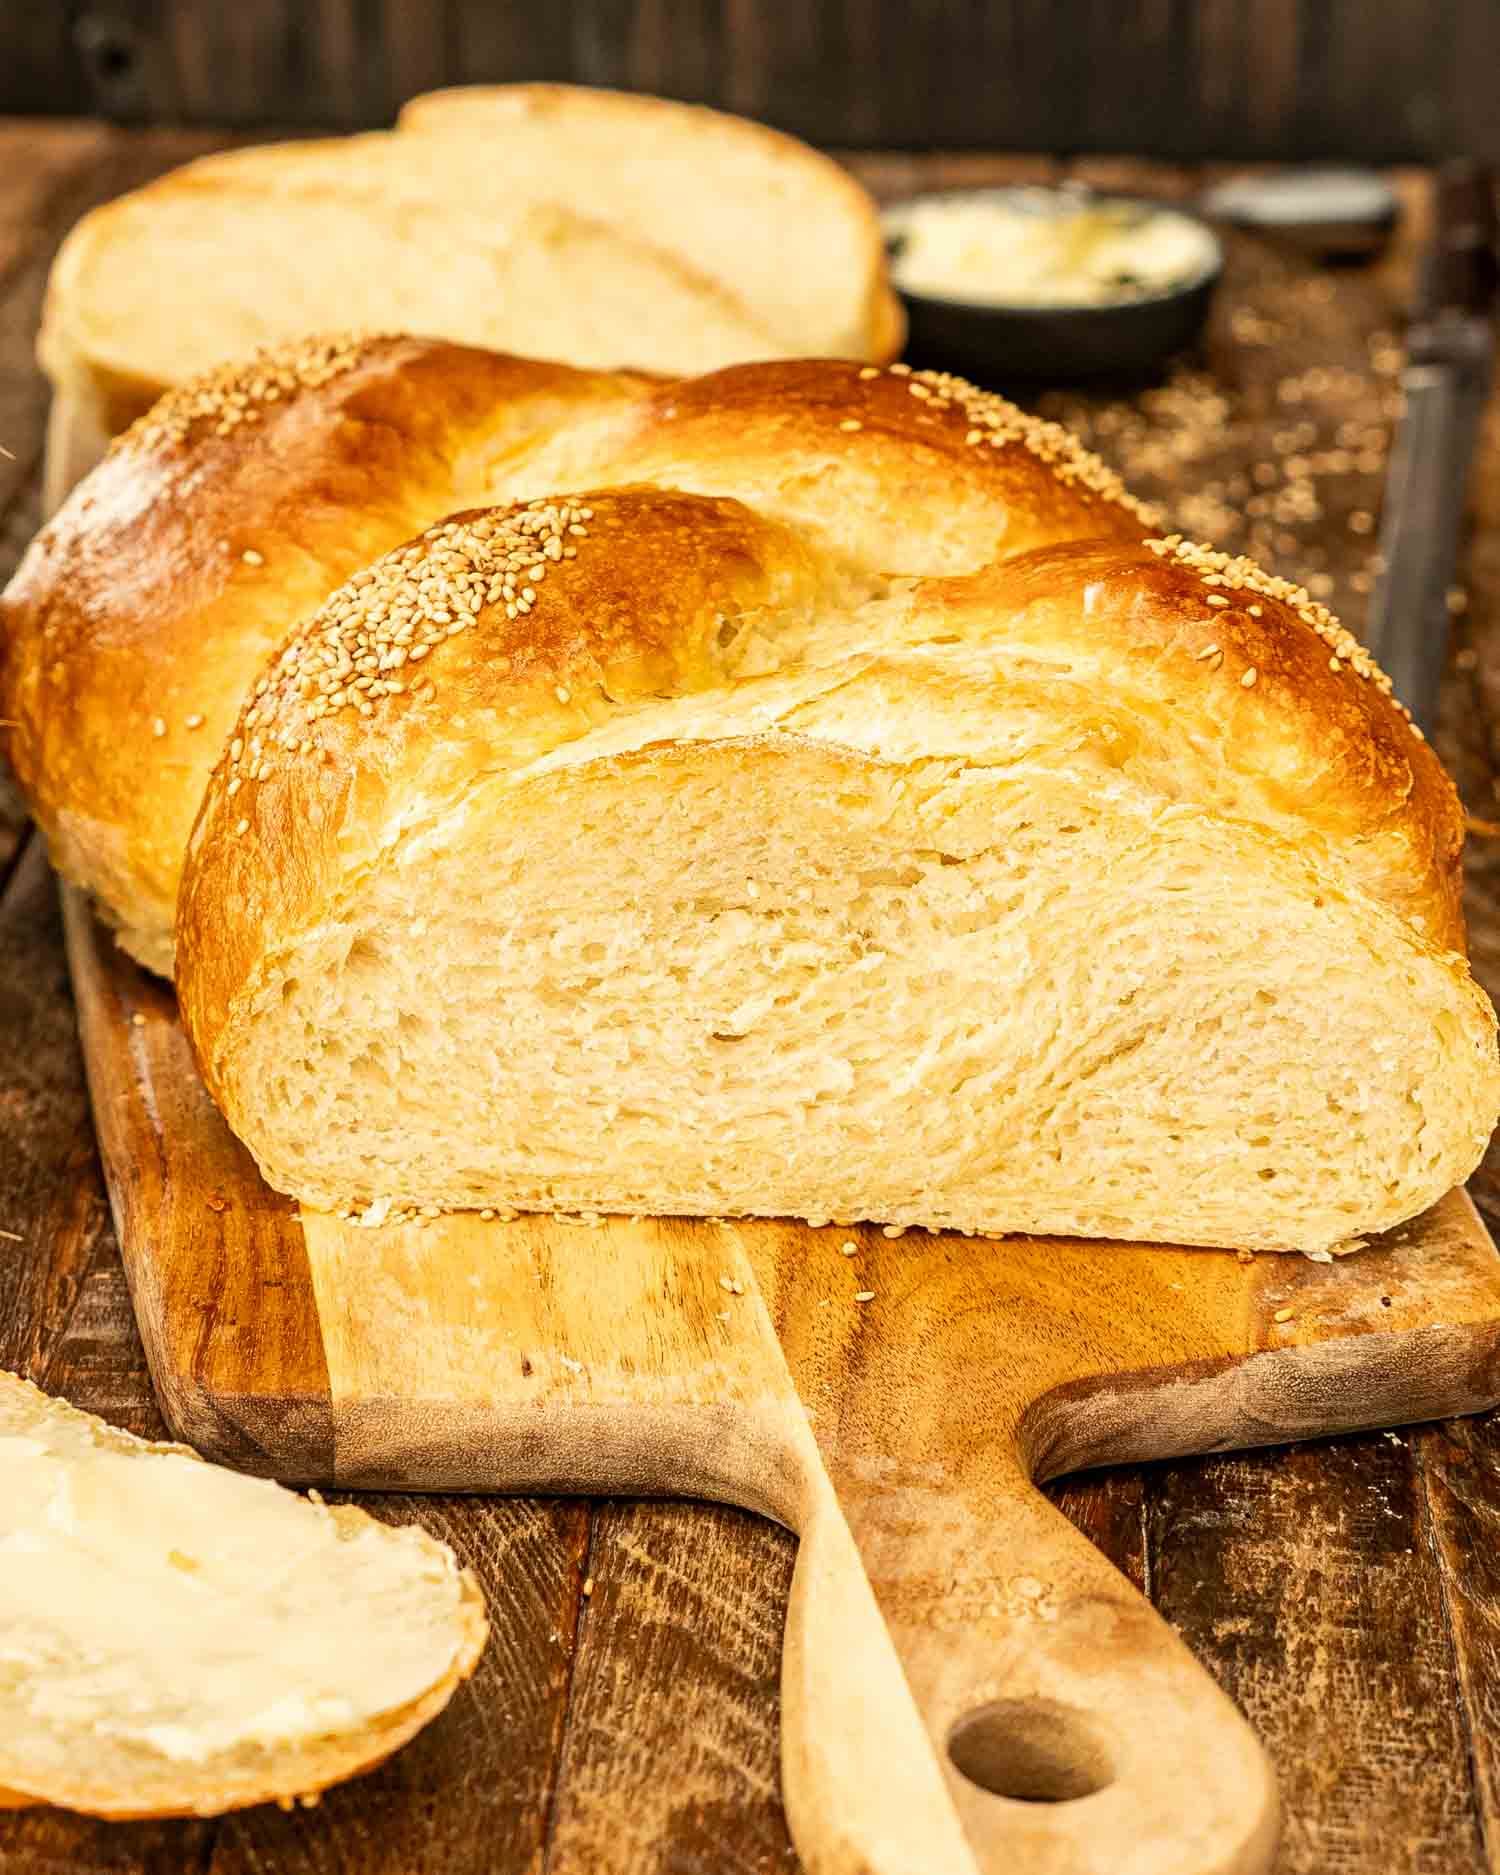 A fresh, golden-braided no knead challah bread on a wooden board with slices and butter nearby.